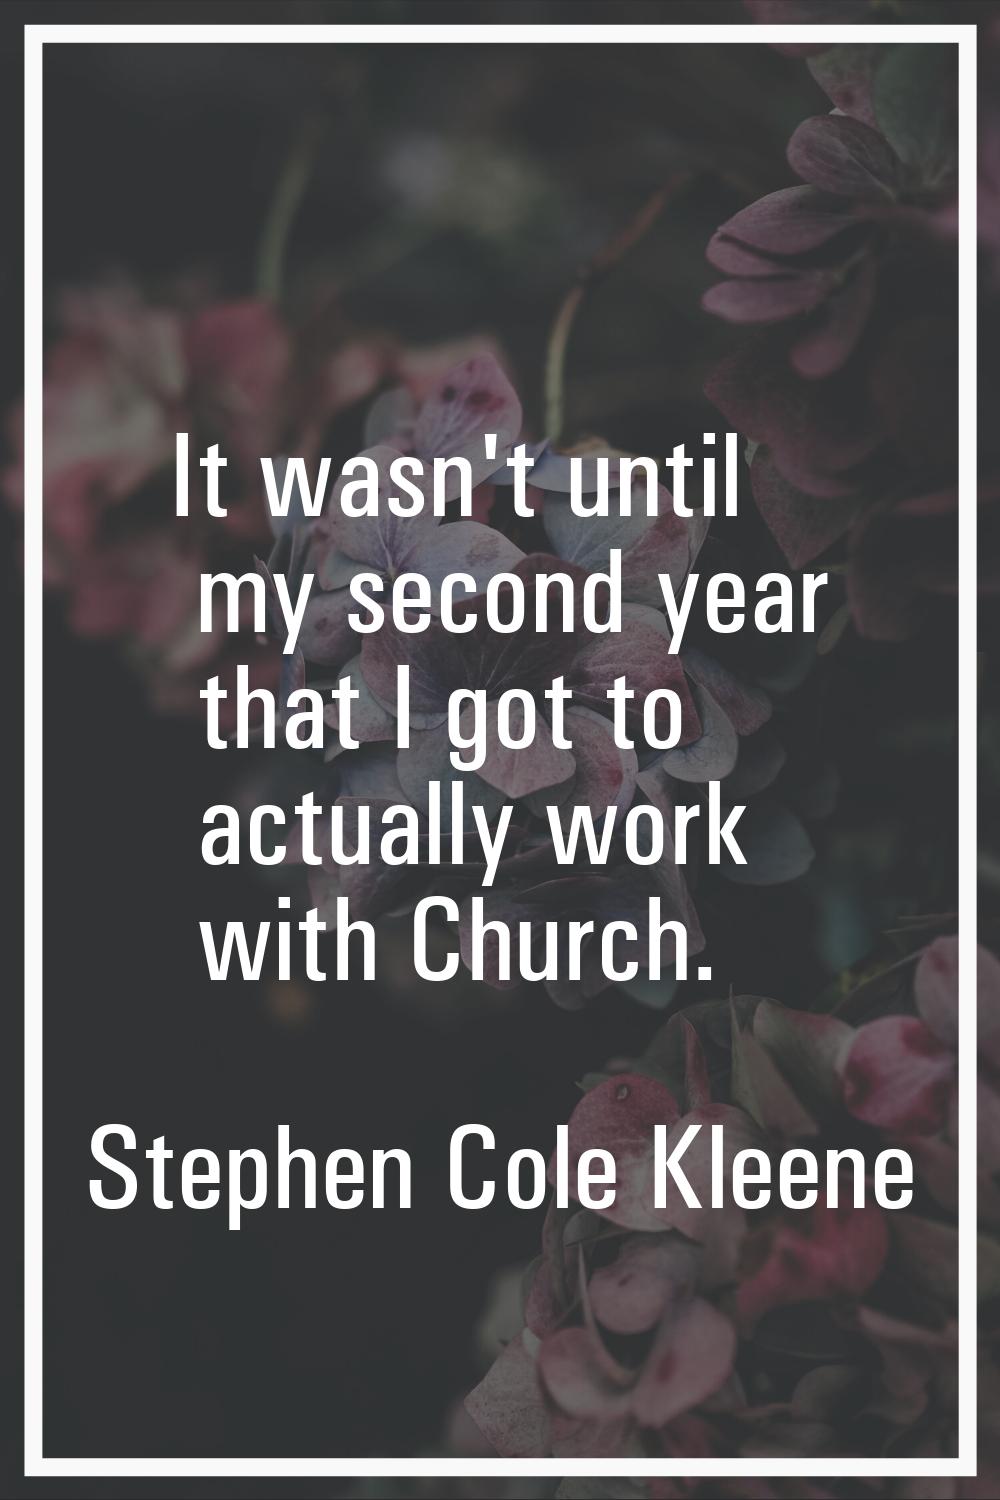 It wasn't until my second year that I got to actually work with Church.